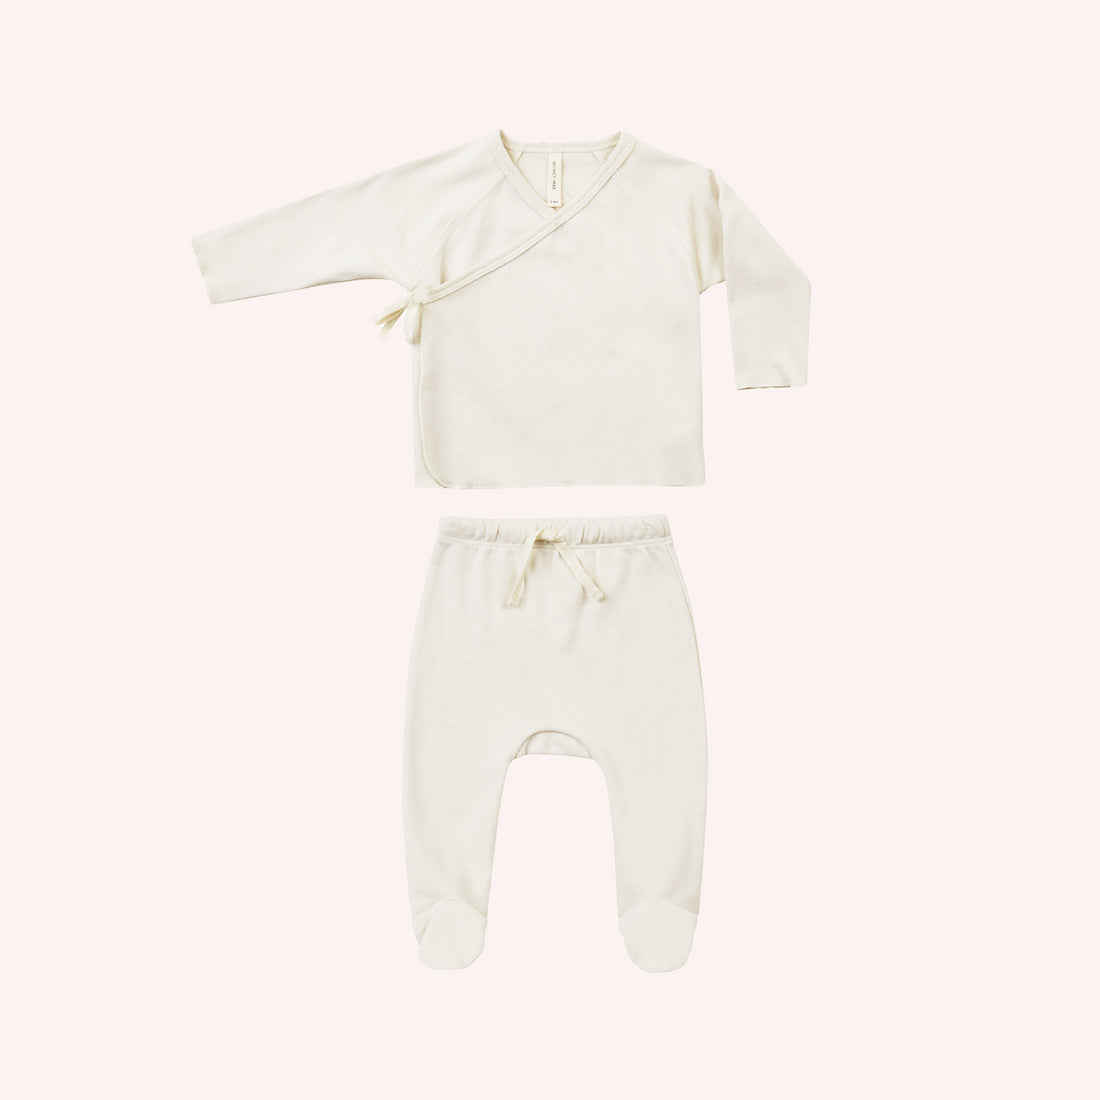 Wrap Top + Footed Pant Set - Ivory